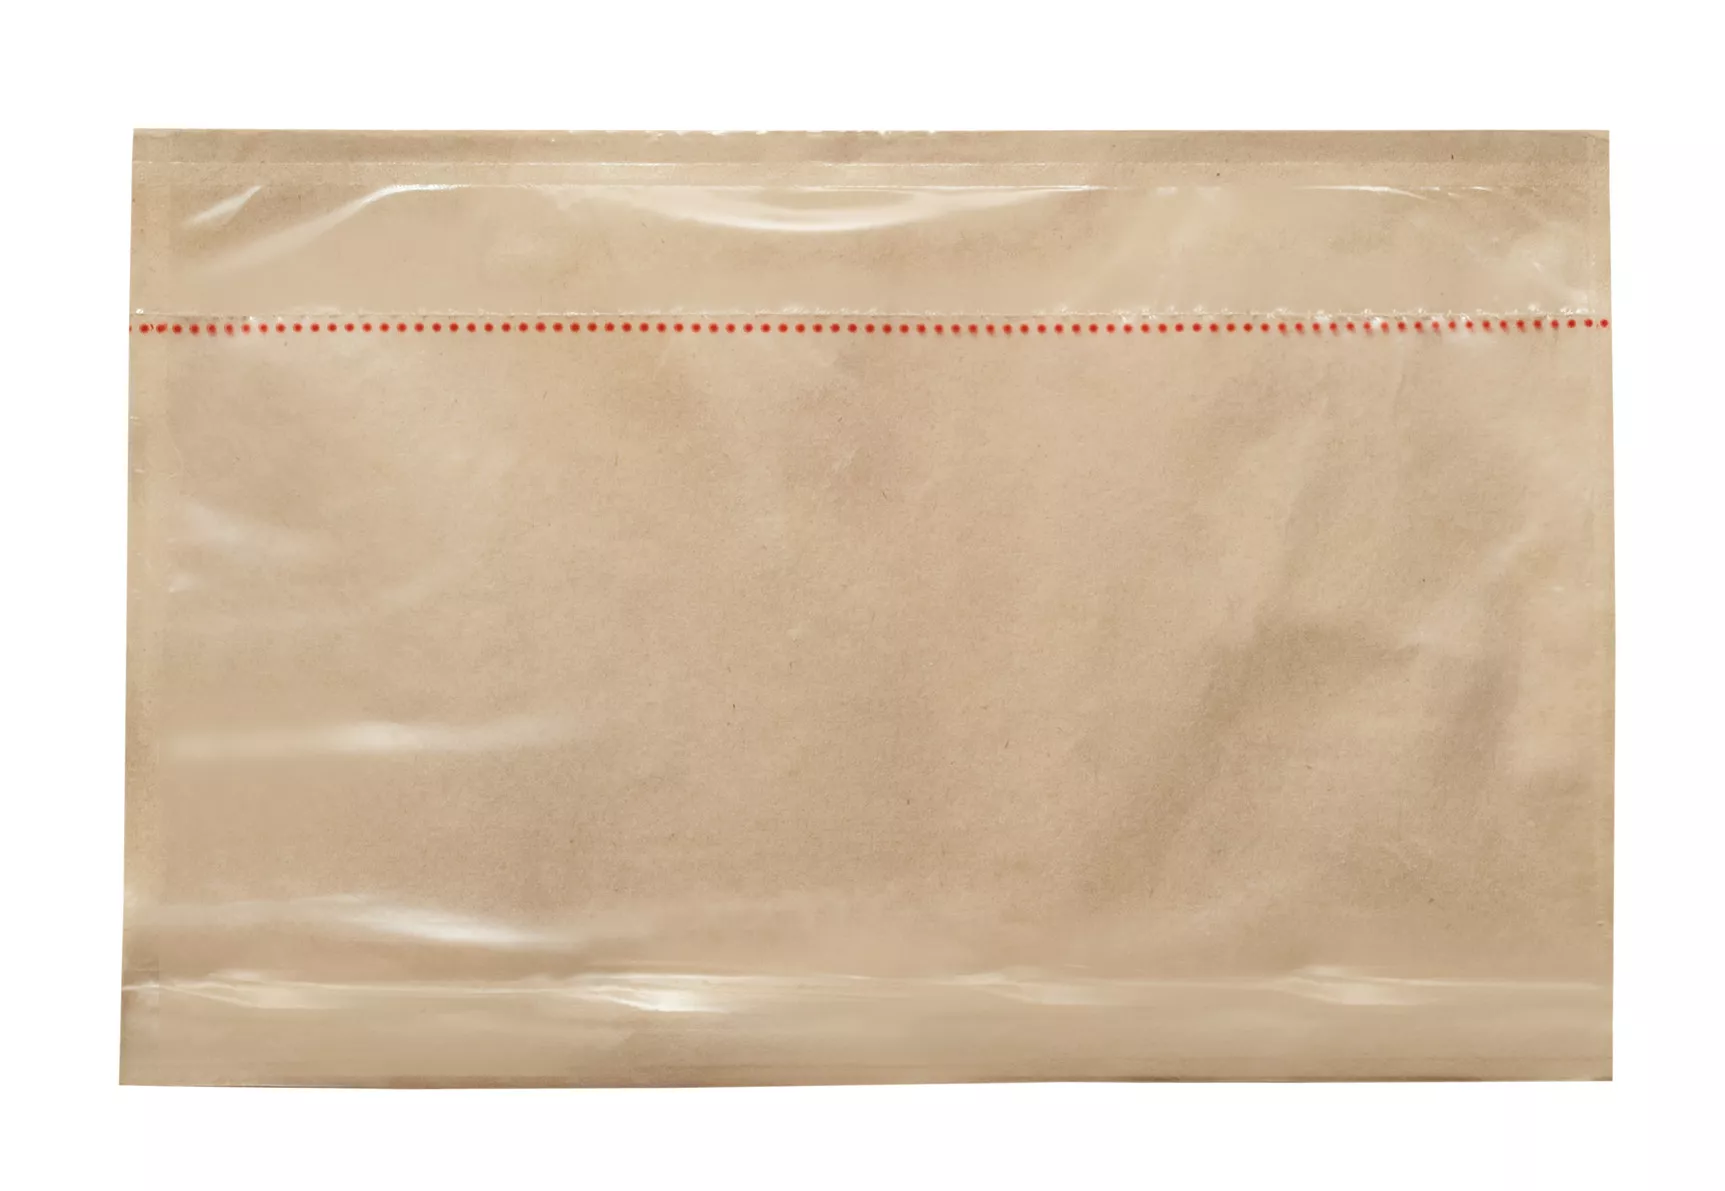 3M™ Non Printed Perforated Packing List Envelope FED1, 6-3/4 in x 10-3/4
in, 500/Case